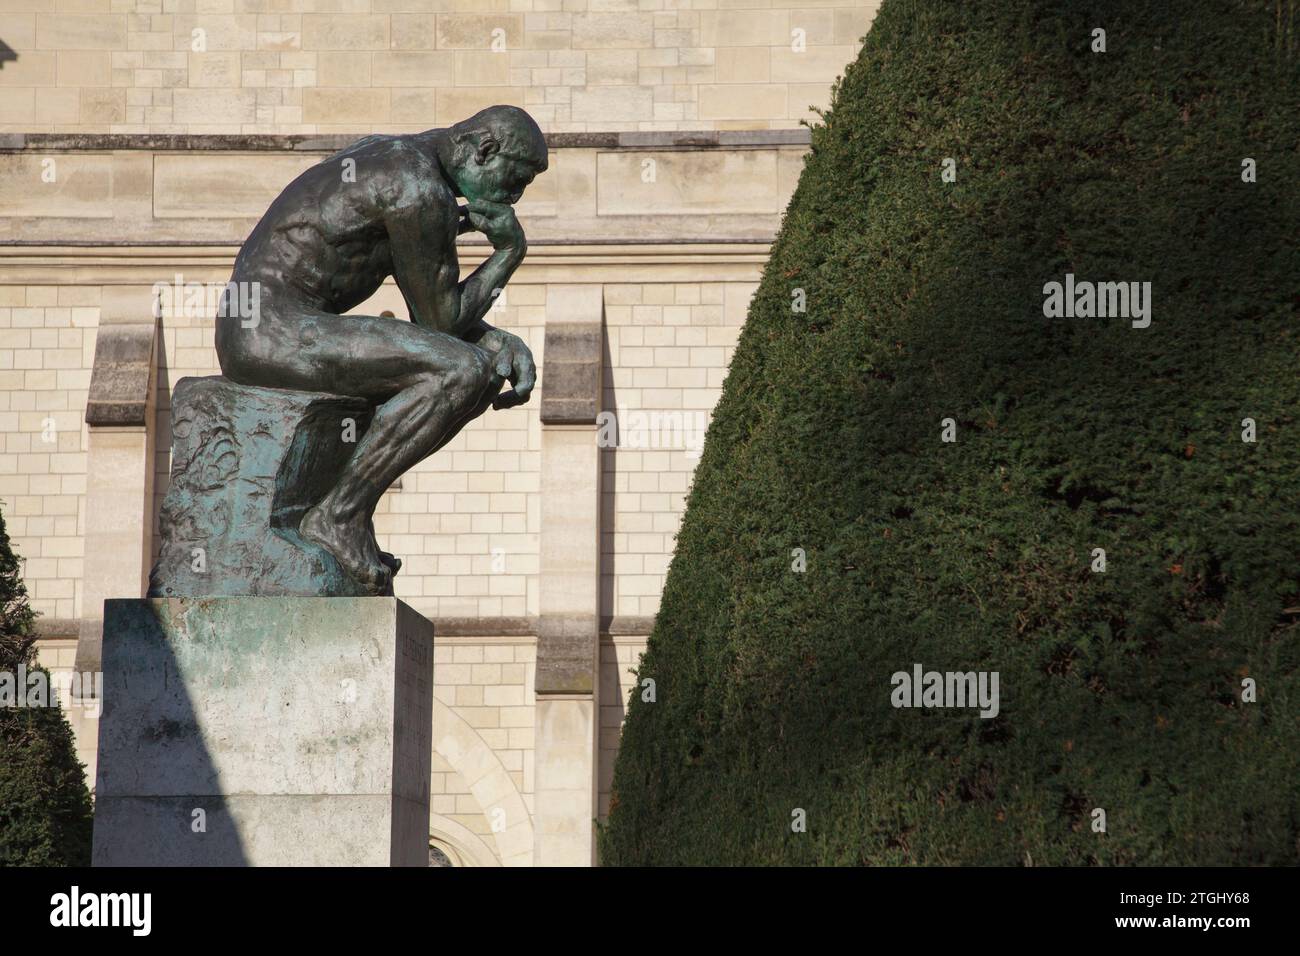 A cast of The Thinker, an iconic sculpture by Rodin in the gardens at Musée Rodin in Paris, France Stock Photo